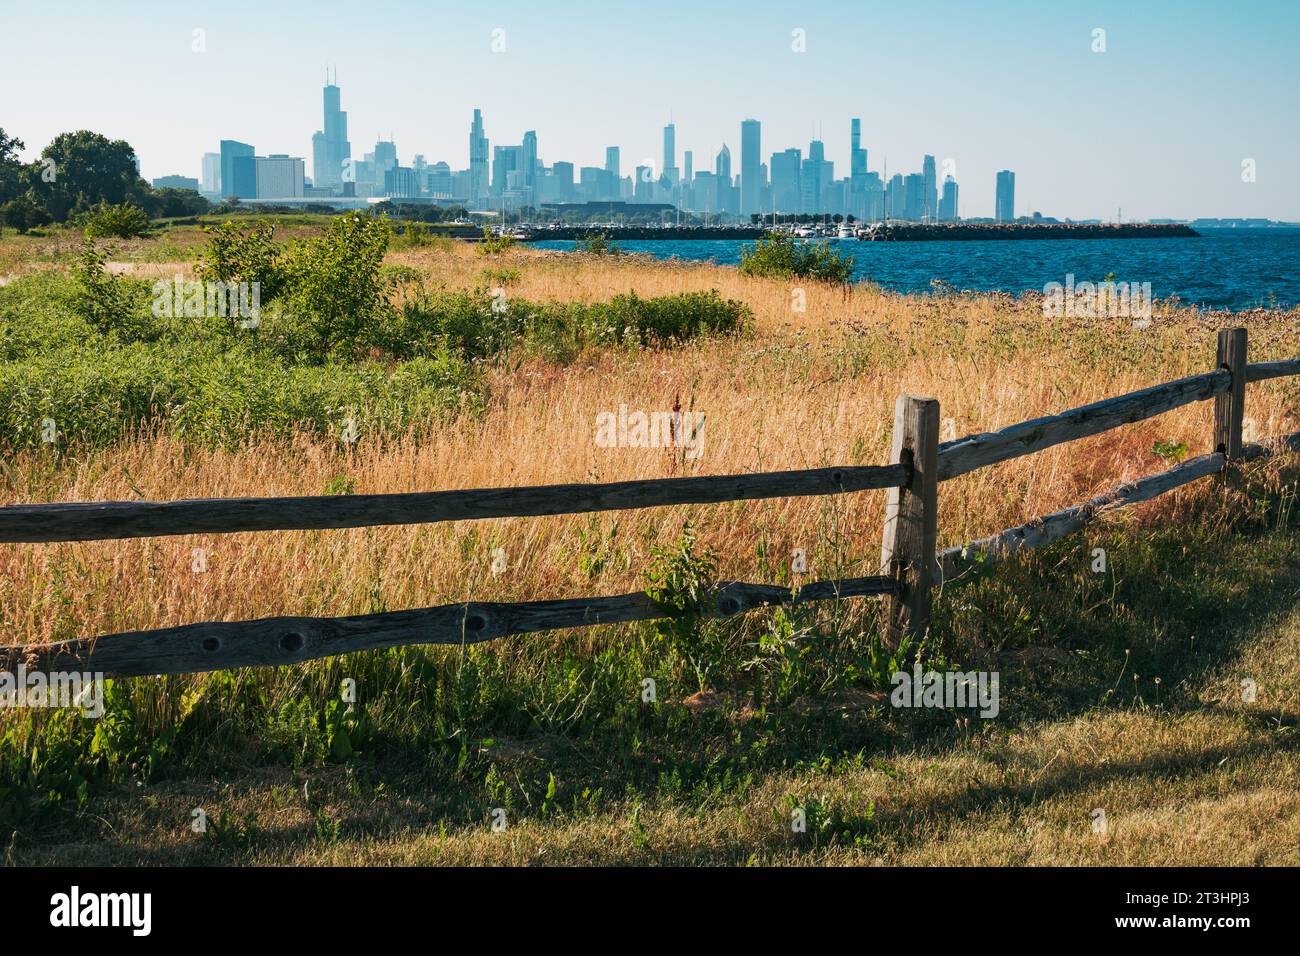 a wooden fence separates a thicket at Burnham Park on the shores of Lake Michigan, Chicago, United States Stock Photo